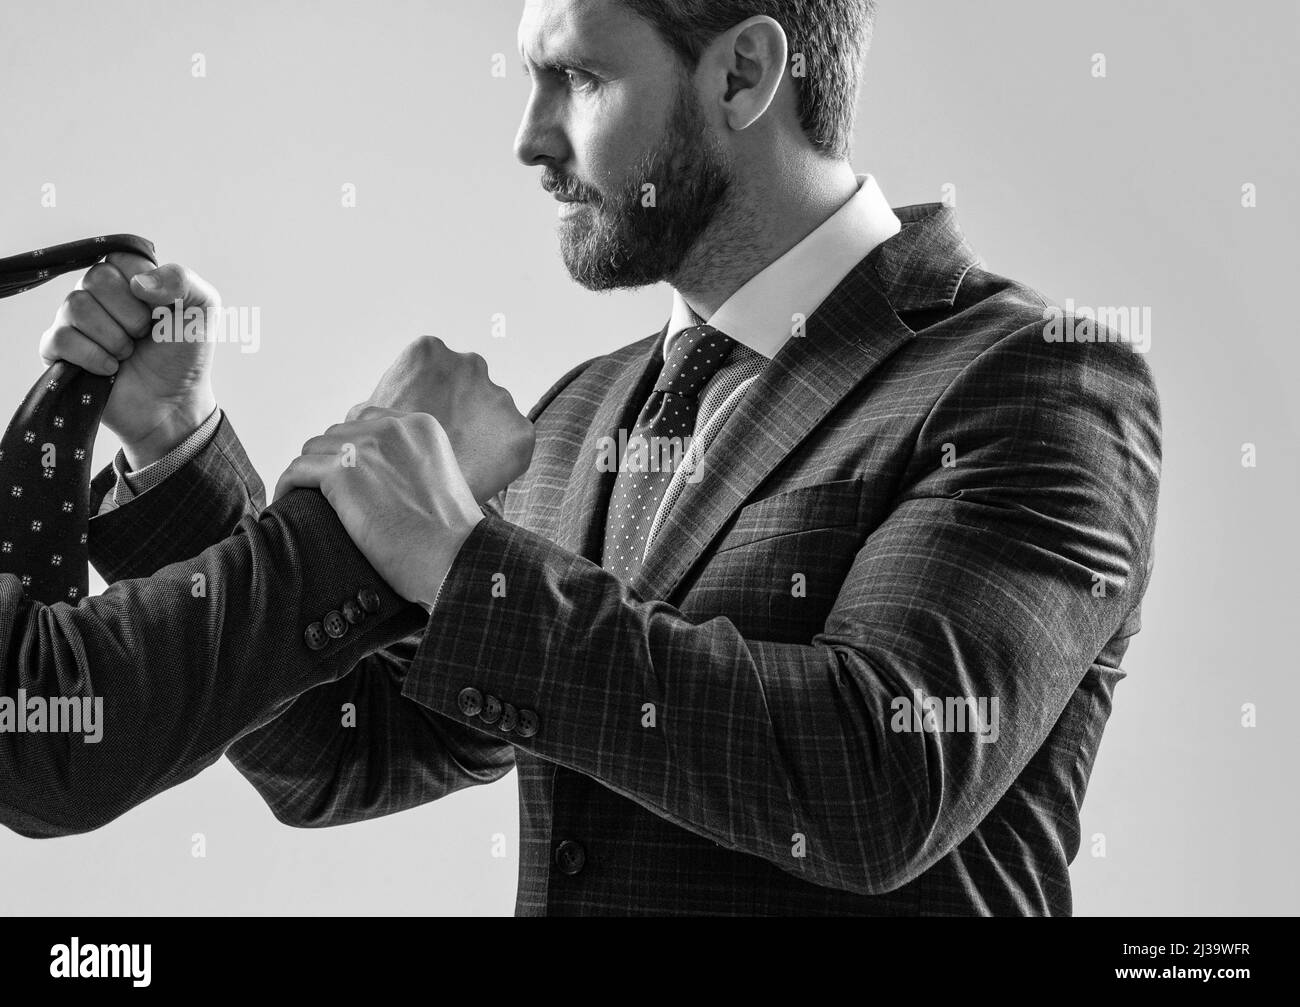 Physical fighting between professional man and male employee grey background, confrontation Stock Photo